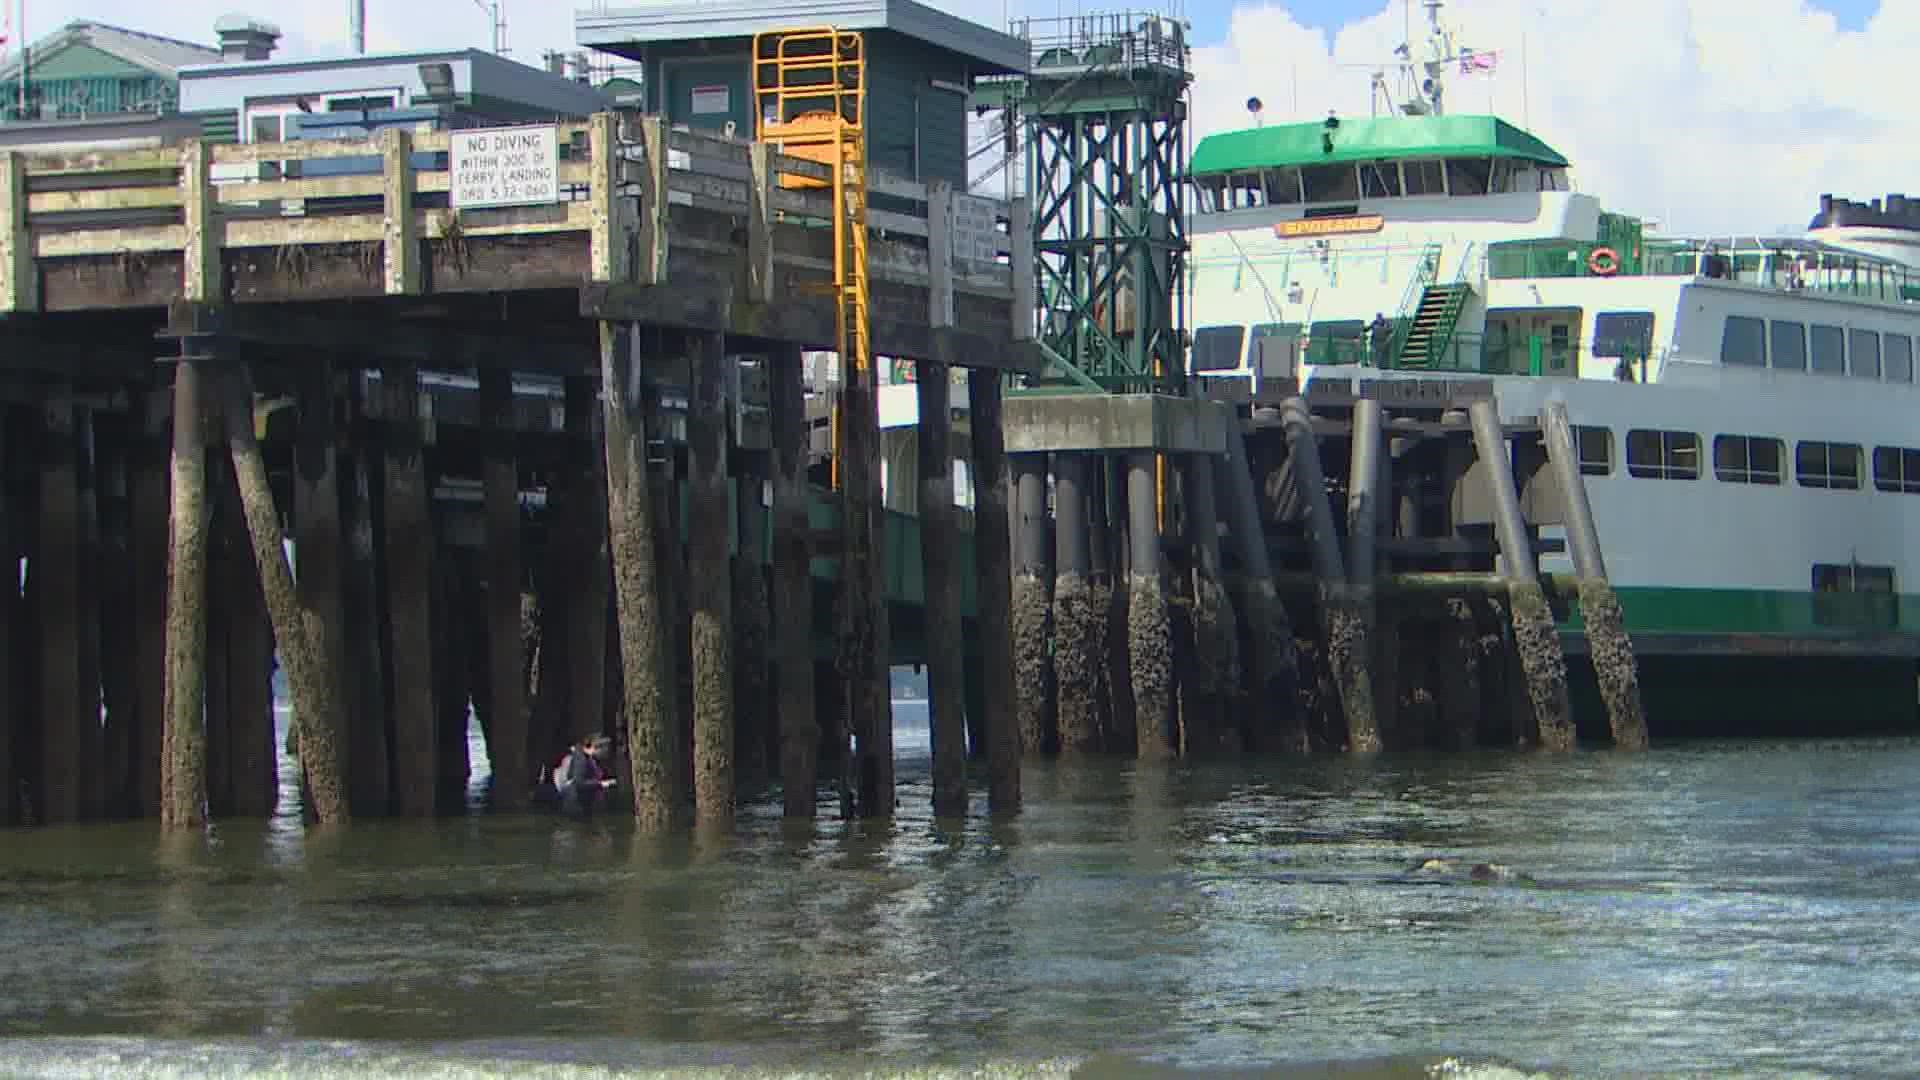 It creates a problematic situation at several of Washington State Ferries’ docks, including in Edmonds.